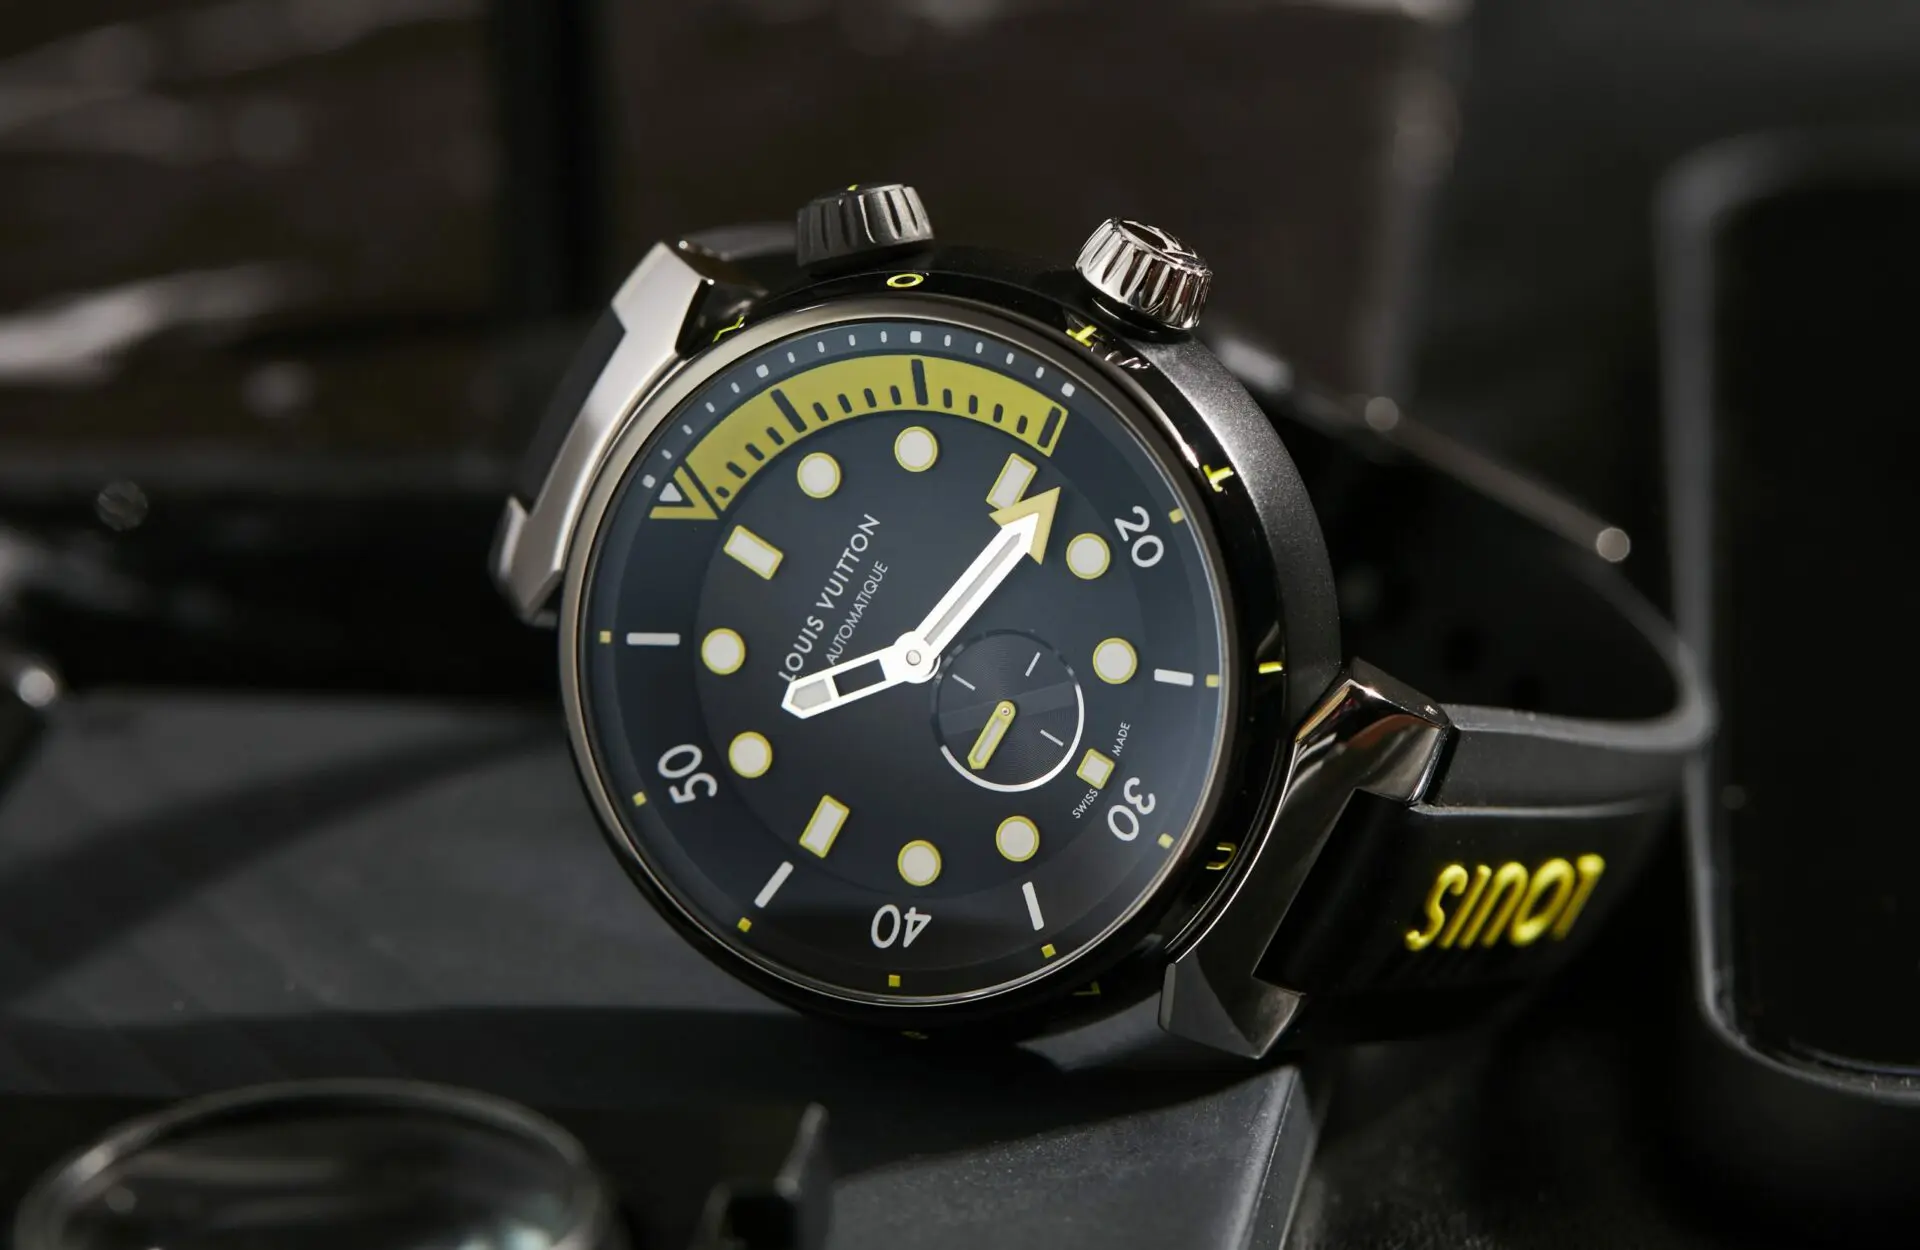 Louis Vuitton: Tambour Street Diver: Two New Looks For The Sporty Urban  Timepiece - Luxferity